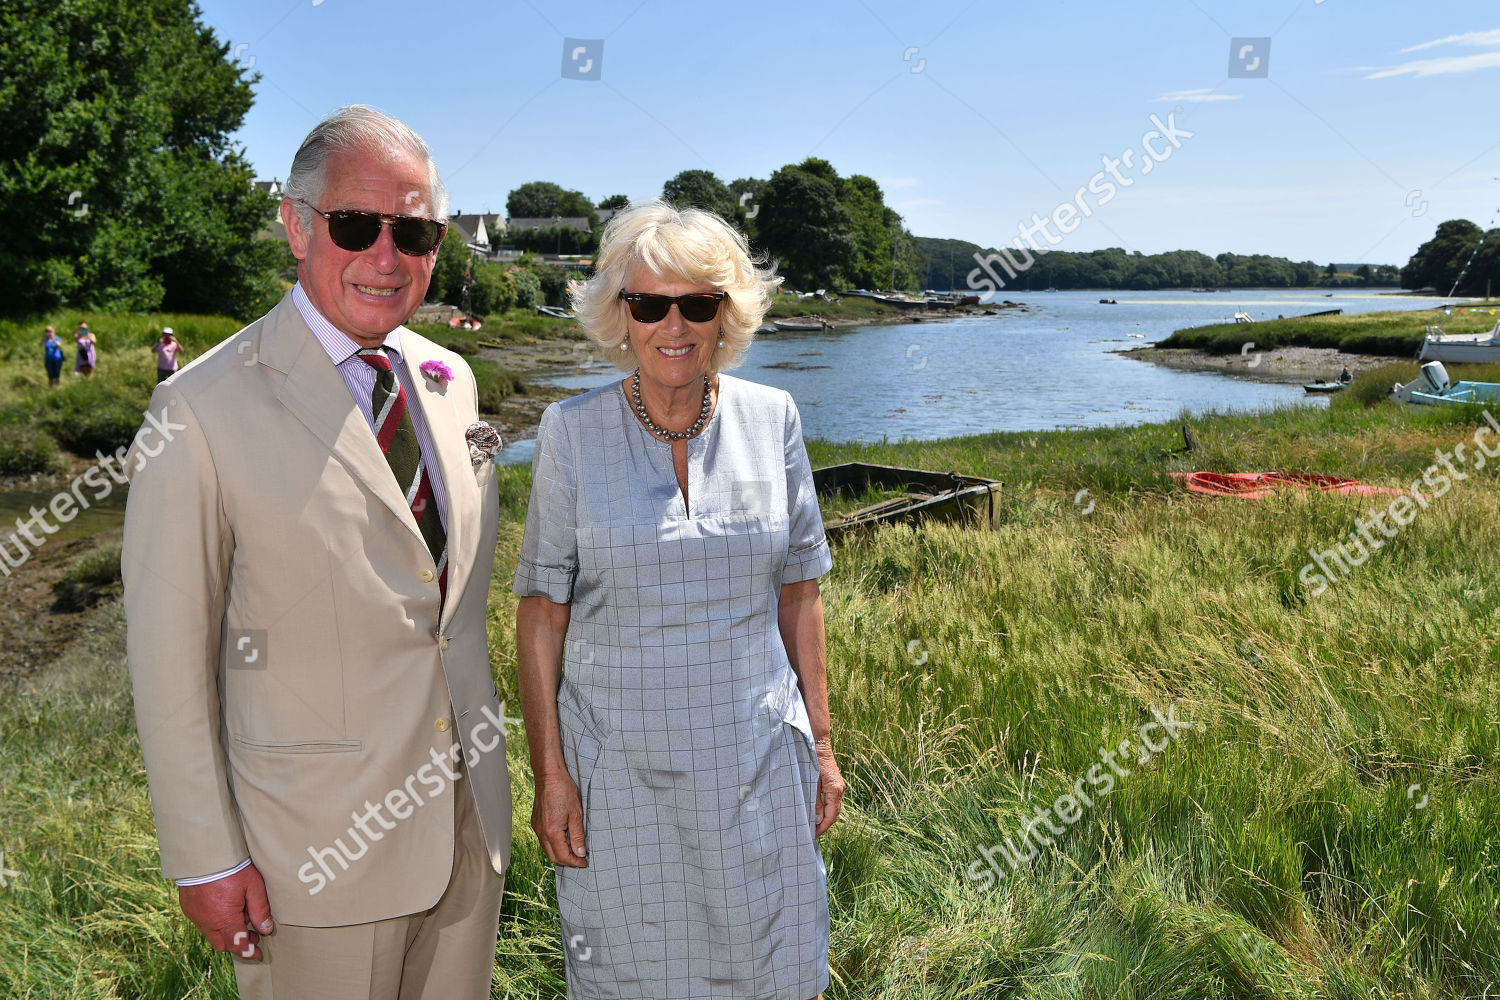 prince-charles-and-camilla-duchess-of-cornwall-visiting-to-wales-day-2-uk-shutterstock-editorial-9733343ap.jpg